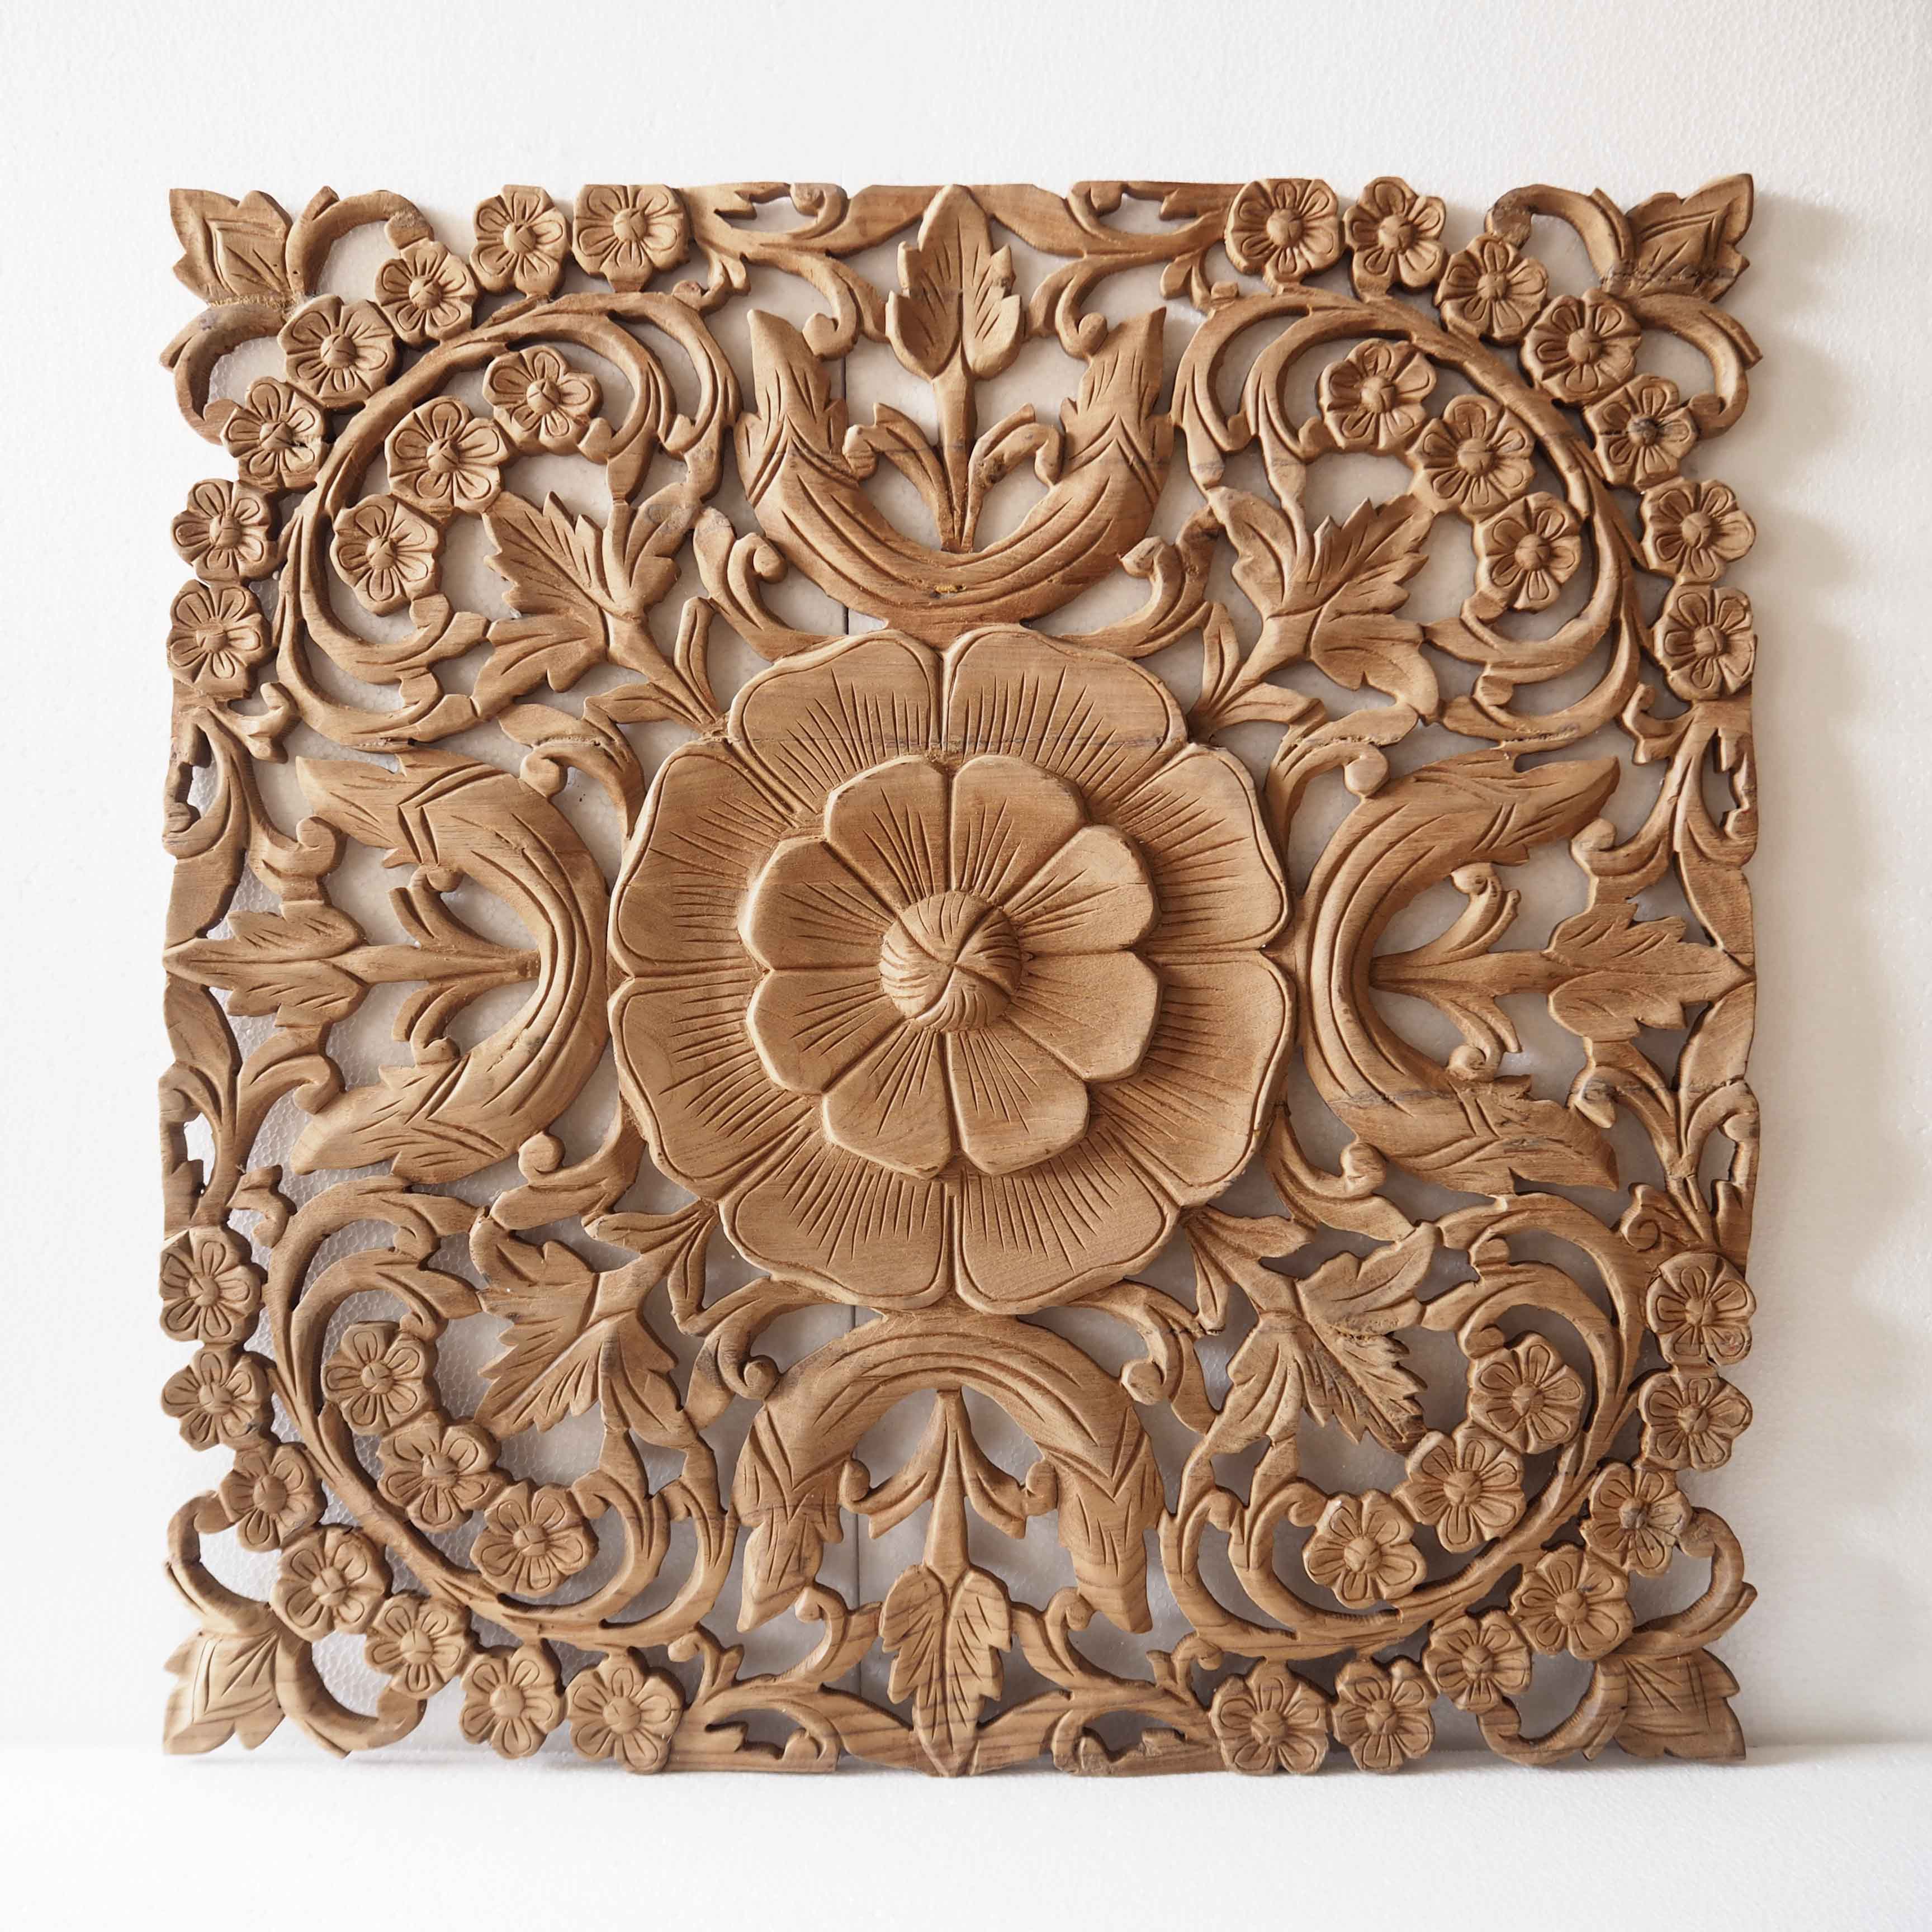 Natural Wooden Wall Art Panel From Thailand - Siam Sawadee